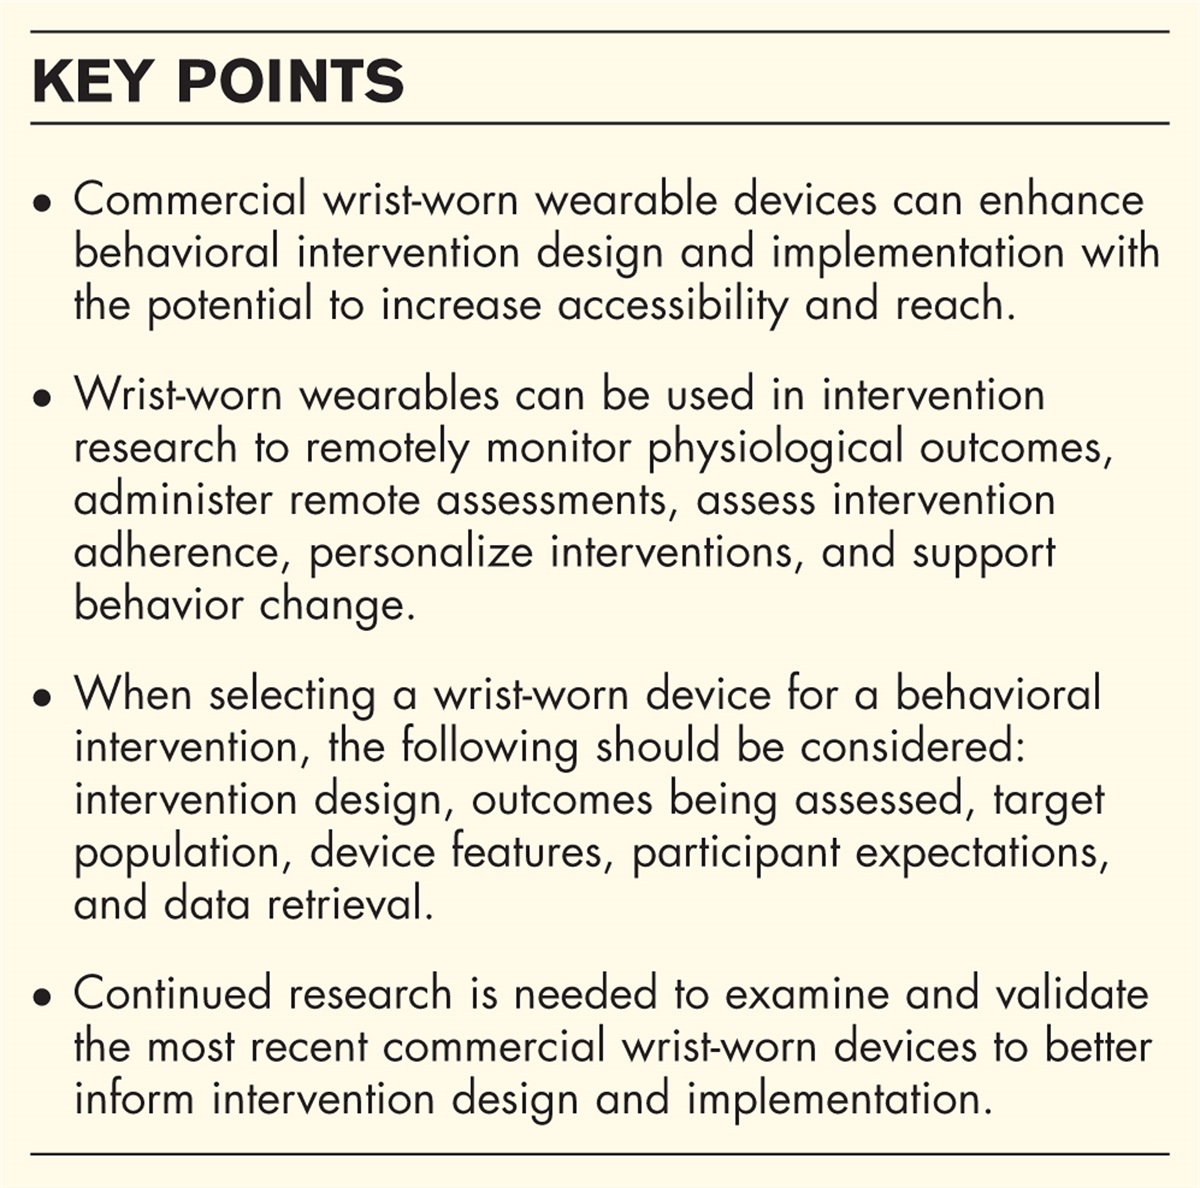 The use of commercial wrist-worn technology to track physiological outcomes in behavioral interventions